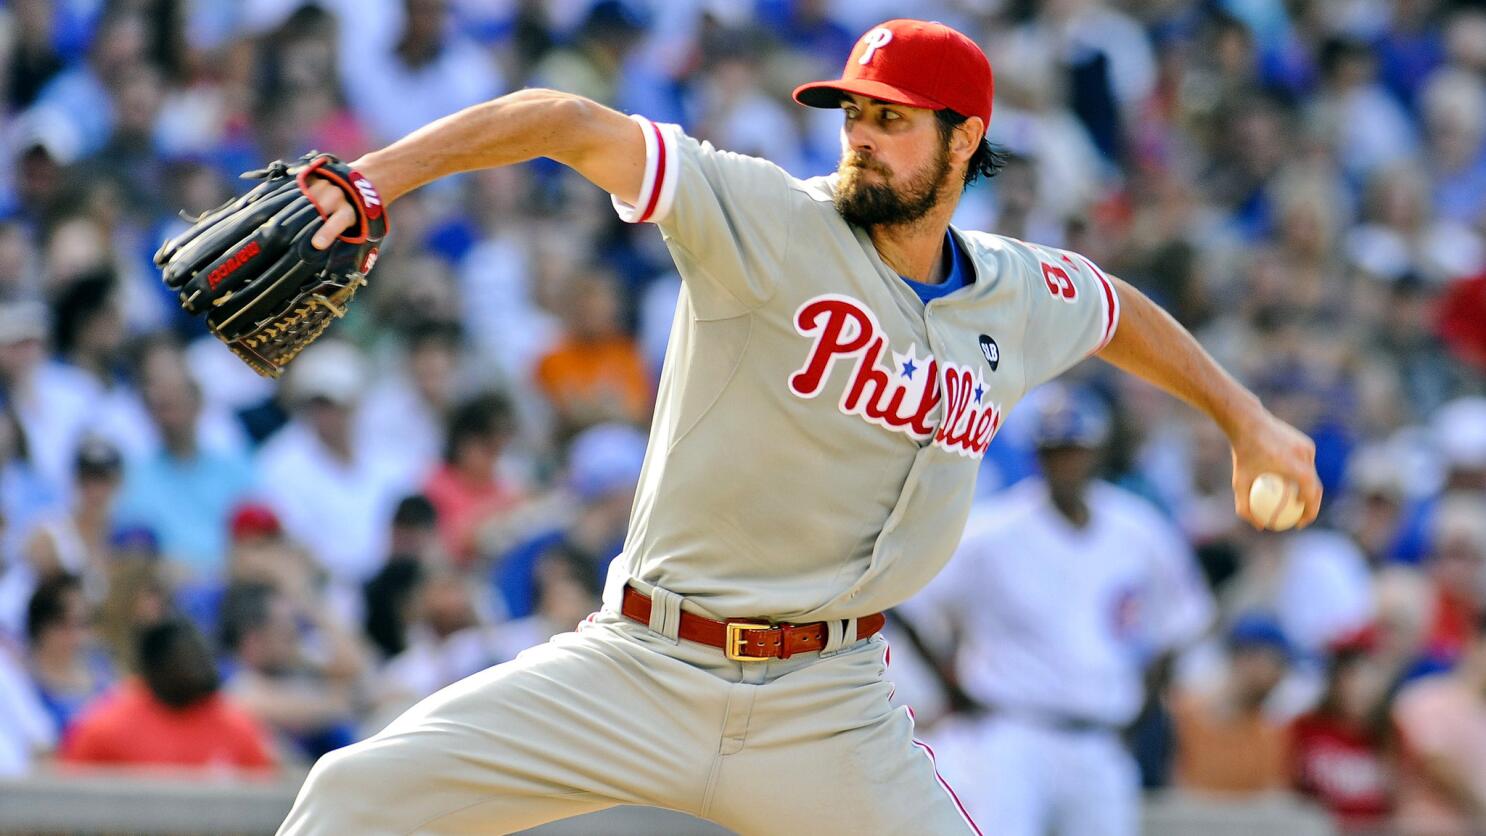 A look back at Cole Hamels' no-hitter against the Cubs - Bleed Cubbie Blue